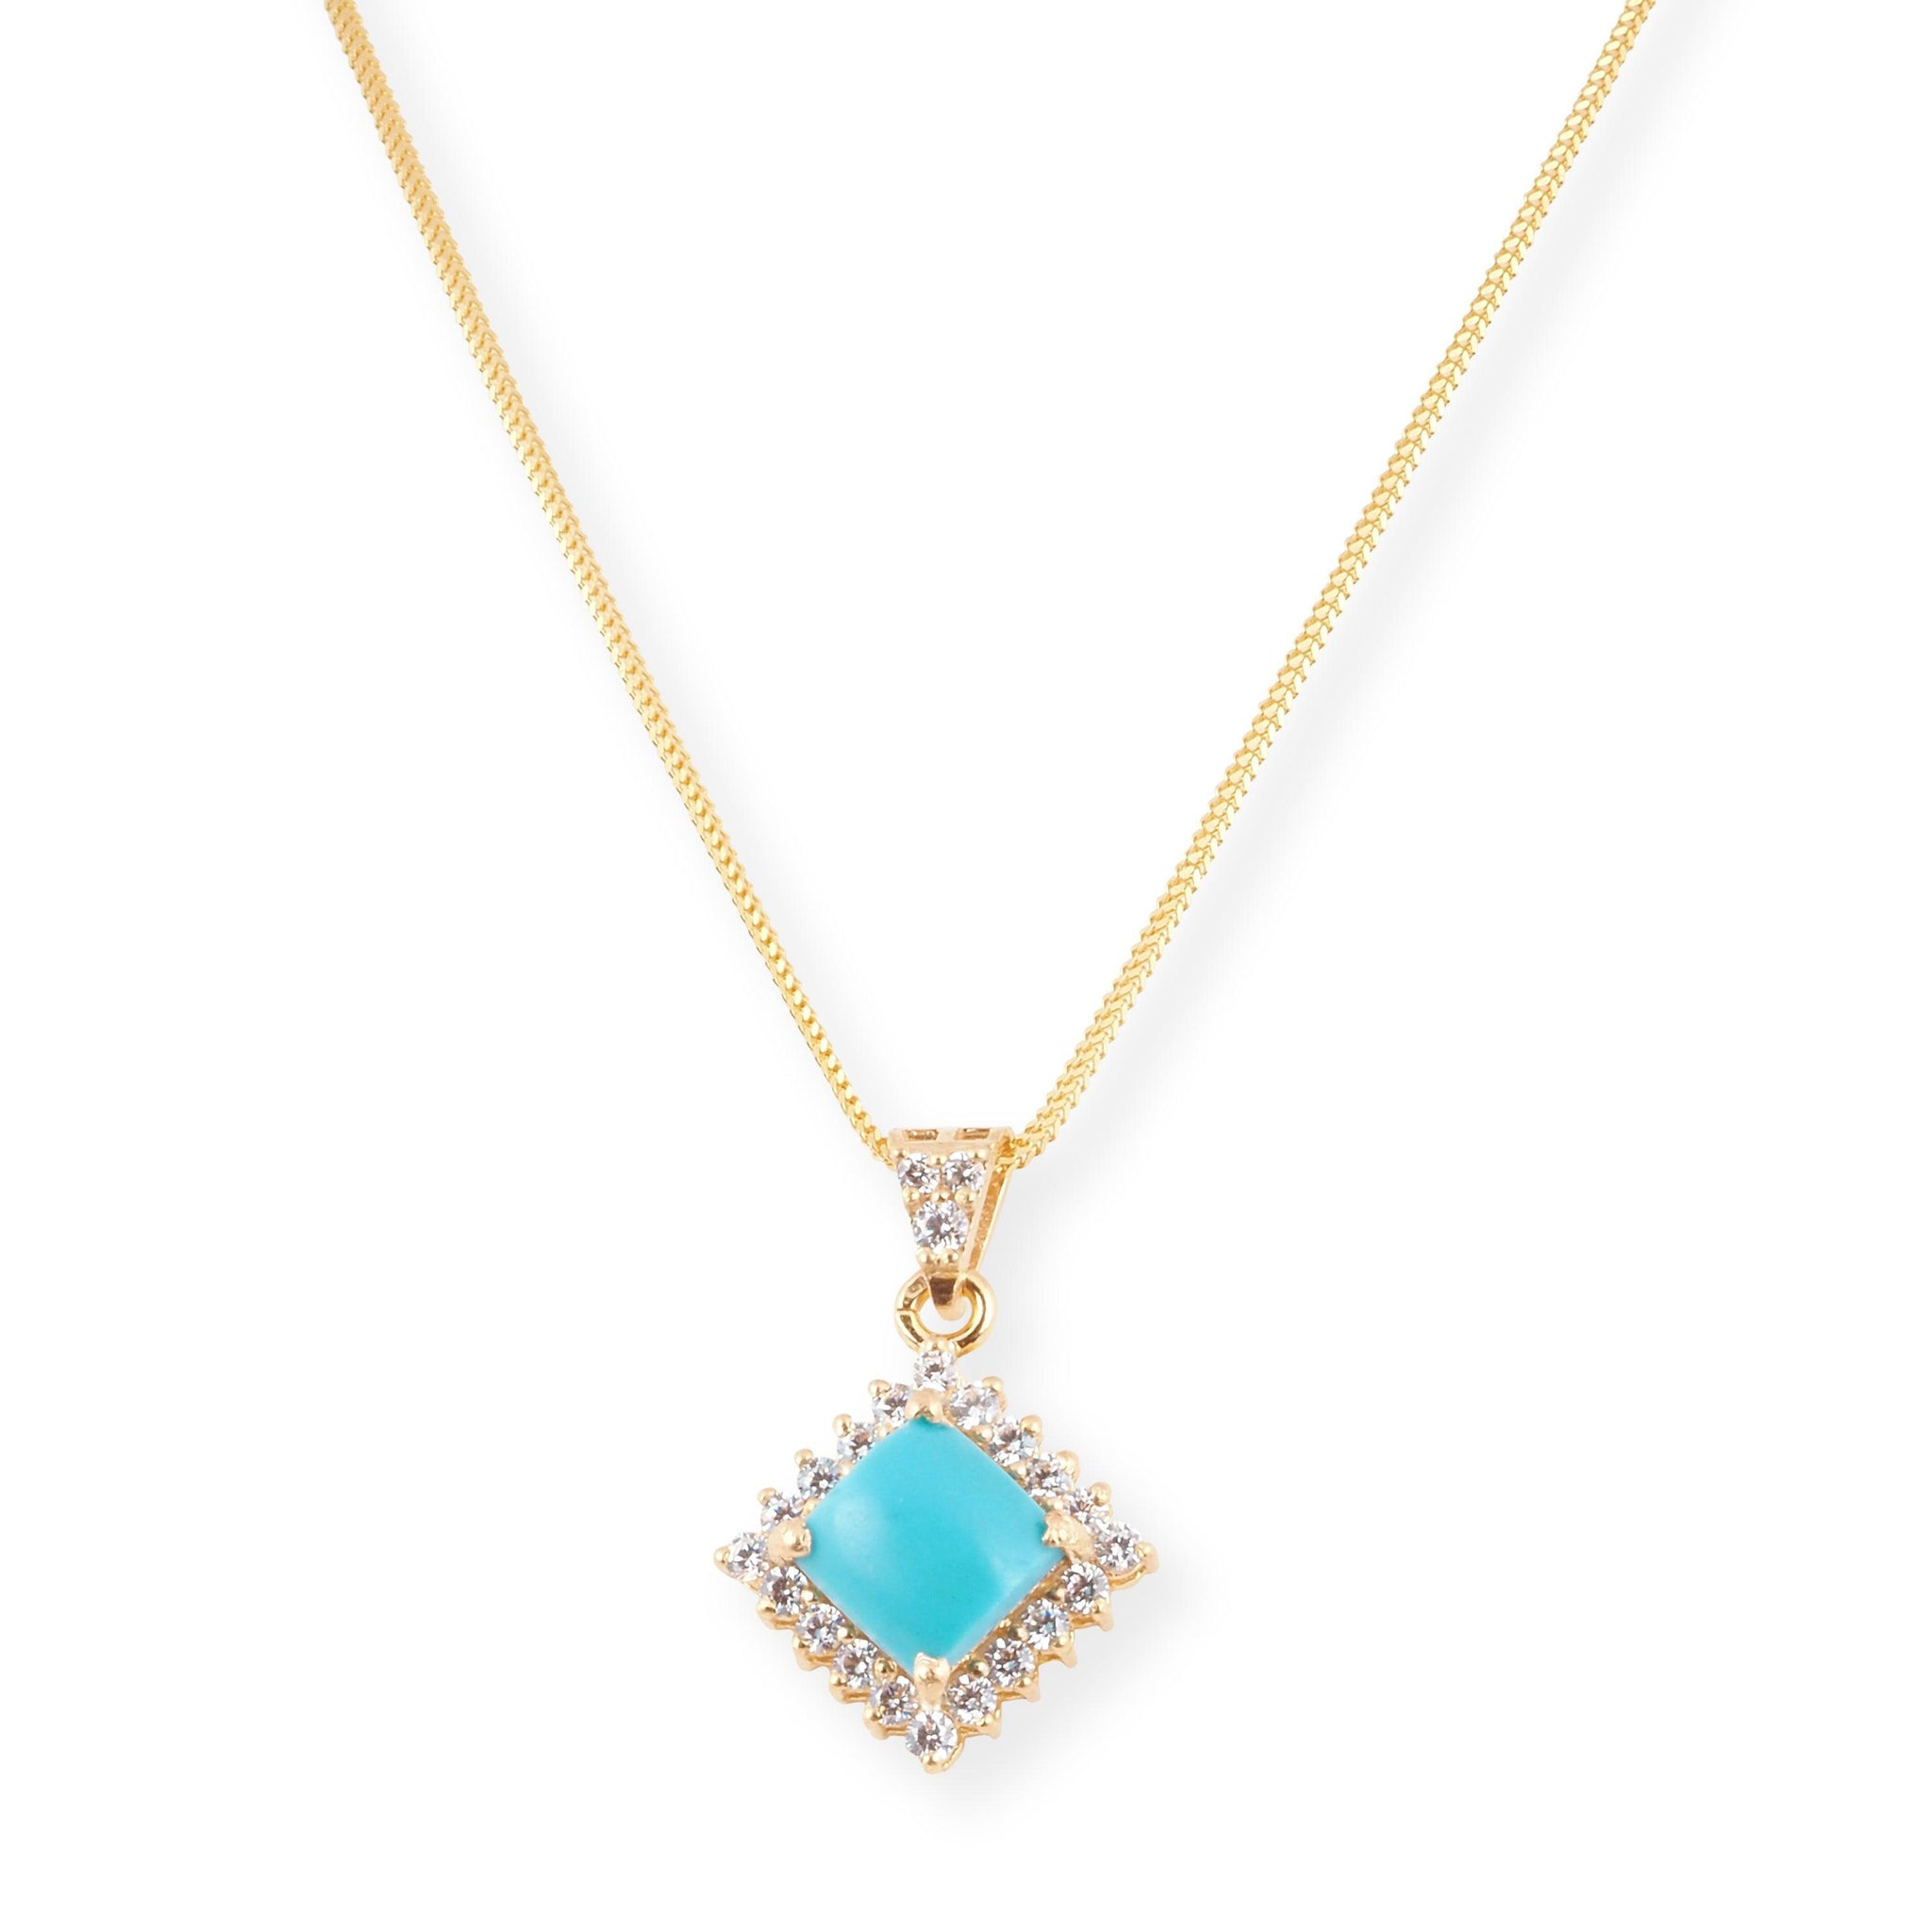 22ct Gold Set with Turquoise and Cubic Zirconia Stones (Pendant + Chain + Earrings) PE-8006